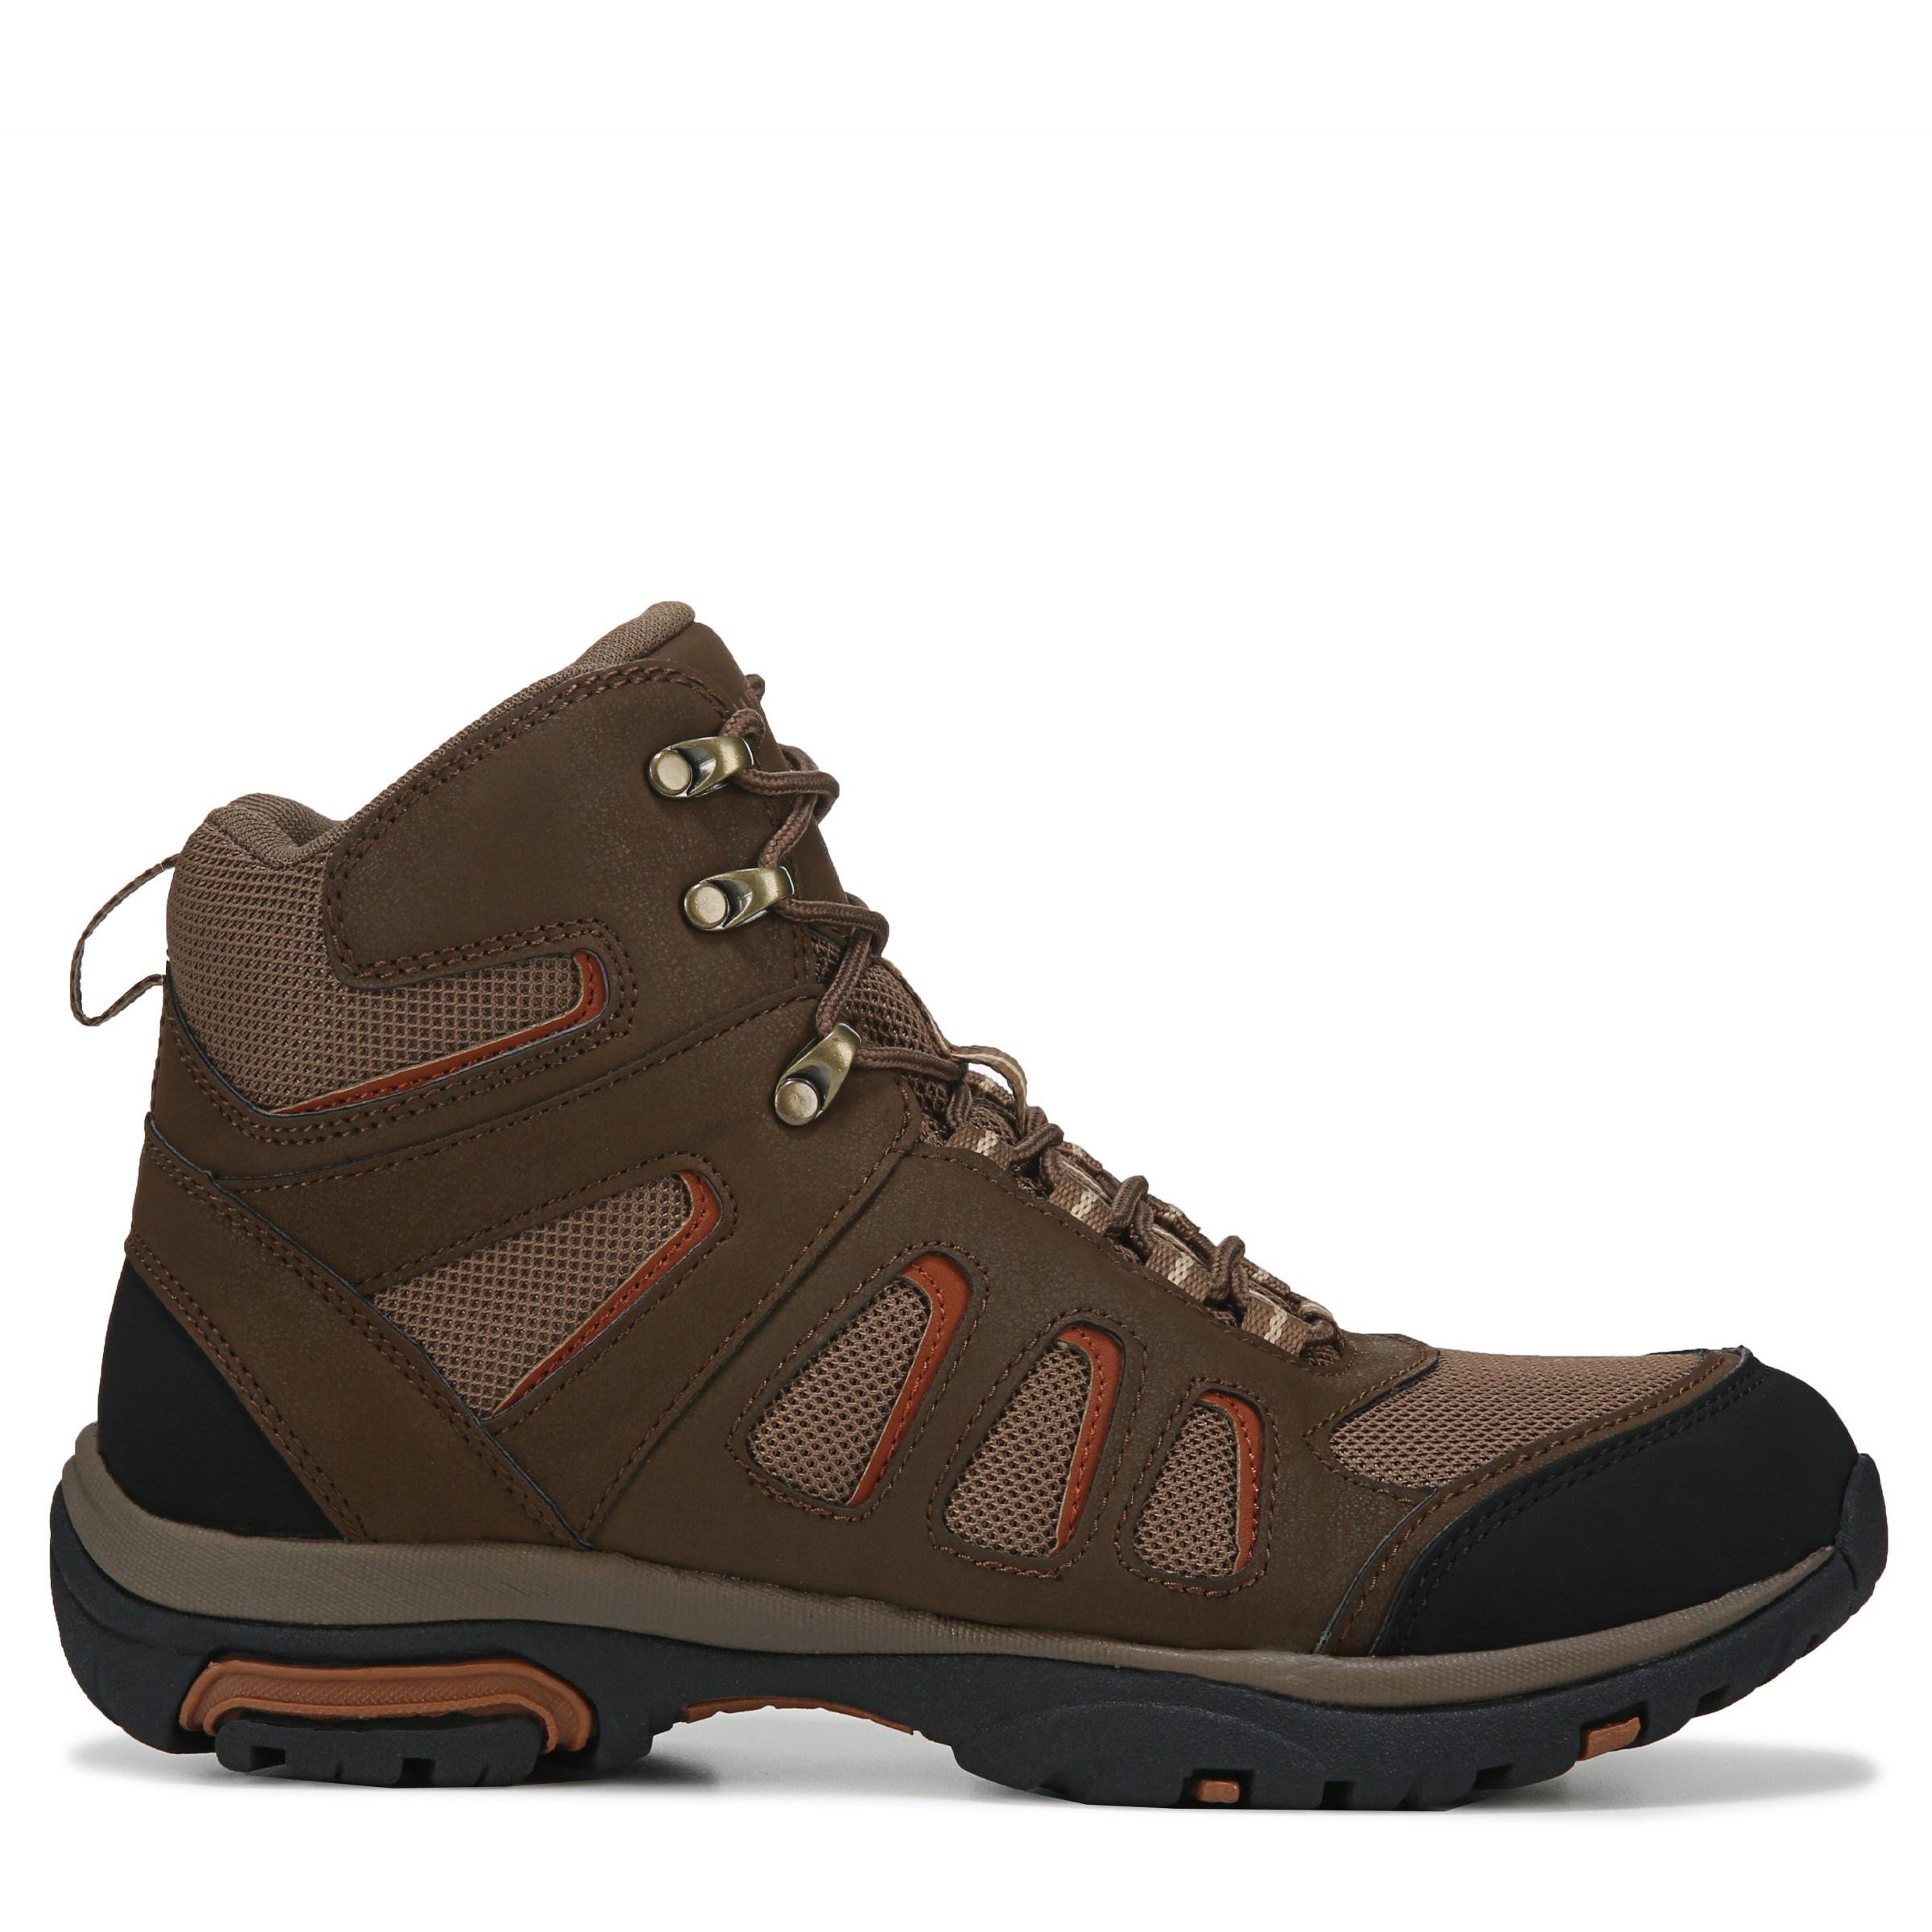 Eastland Hickory Hiking Boots in Tan 